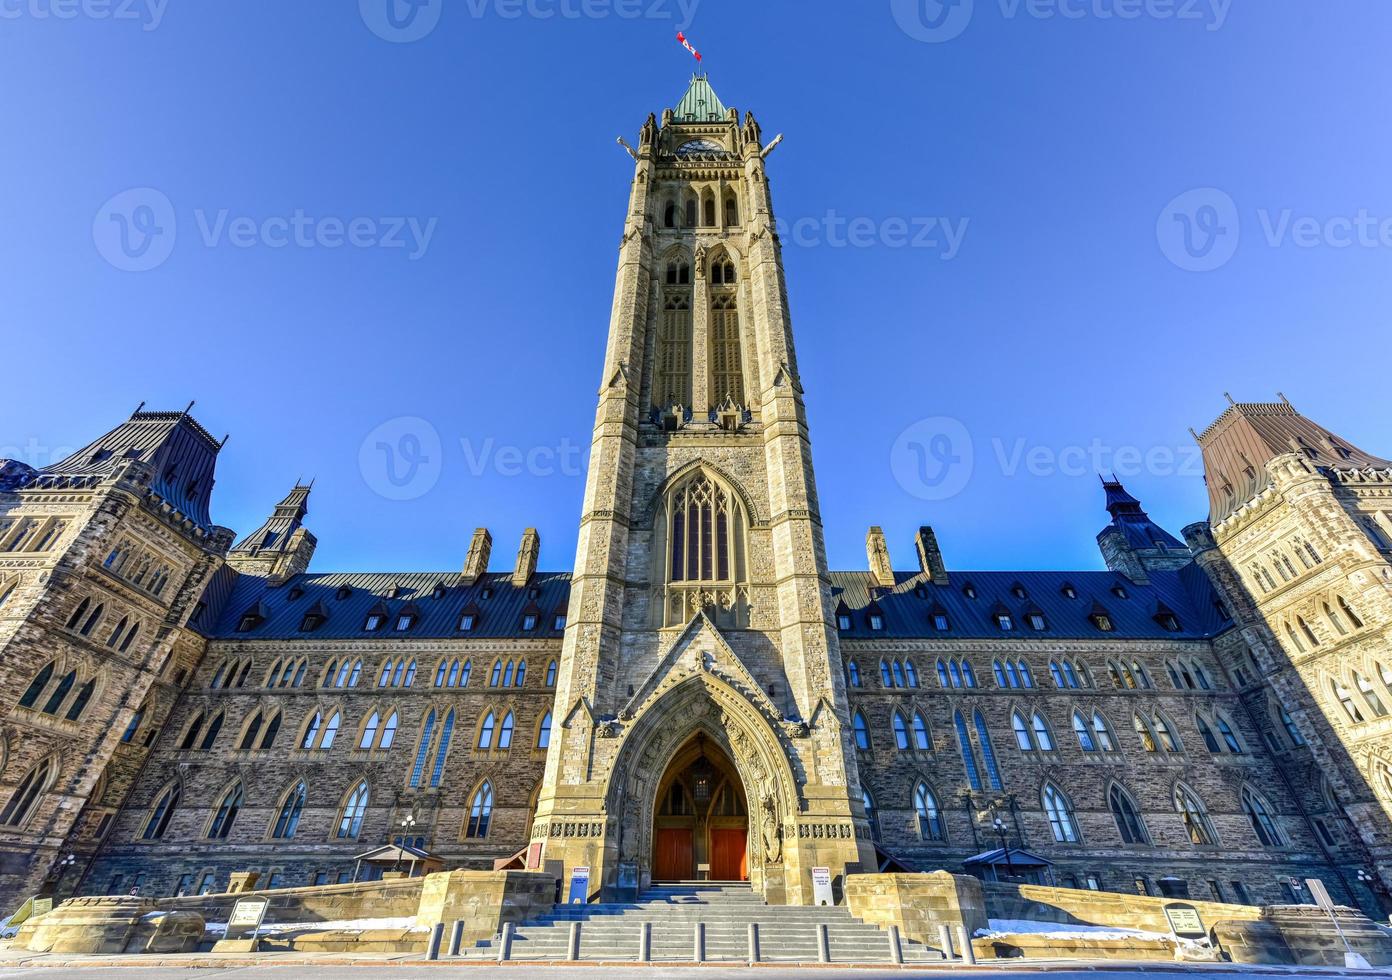 Parliament Hill and the Canadian House of Parliament in Ottawa, Canada during wintertime. photo